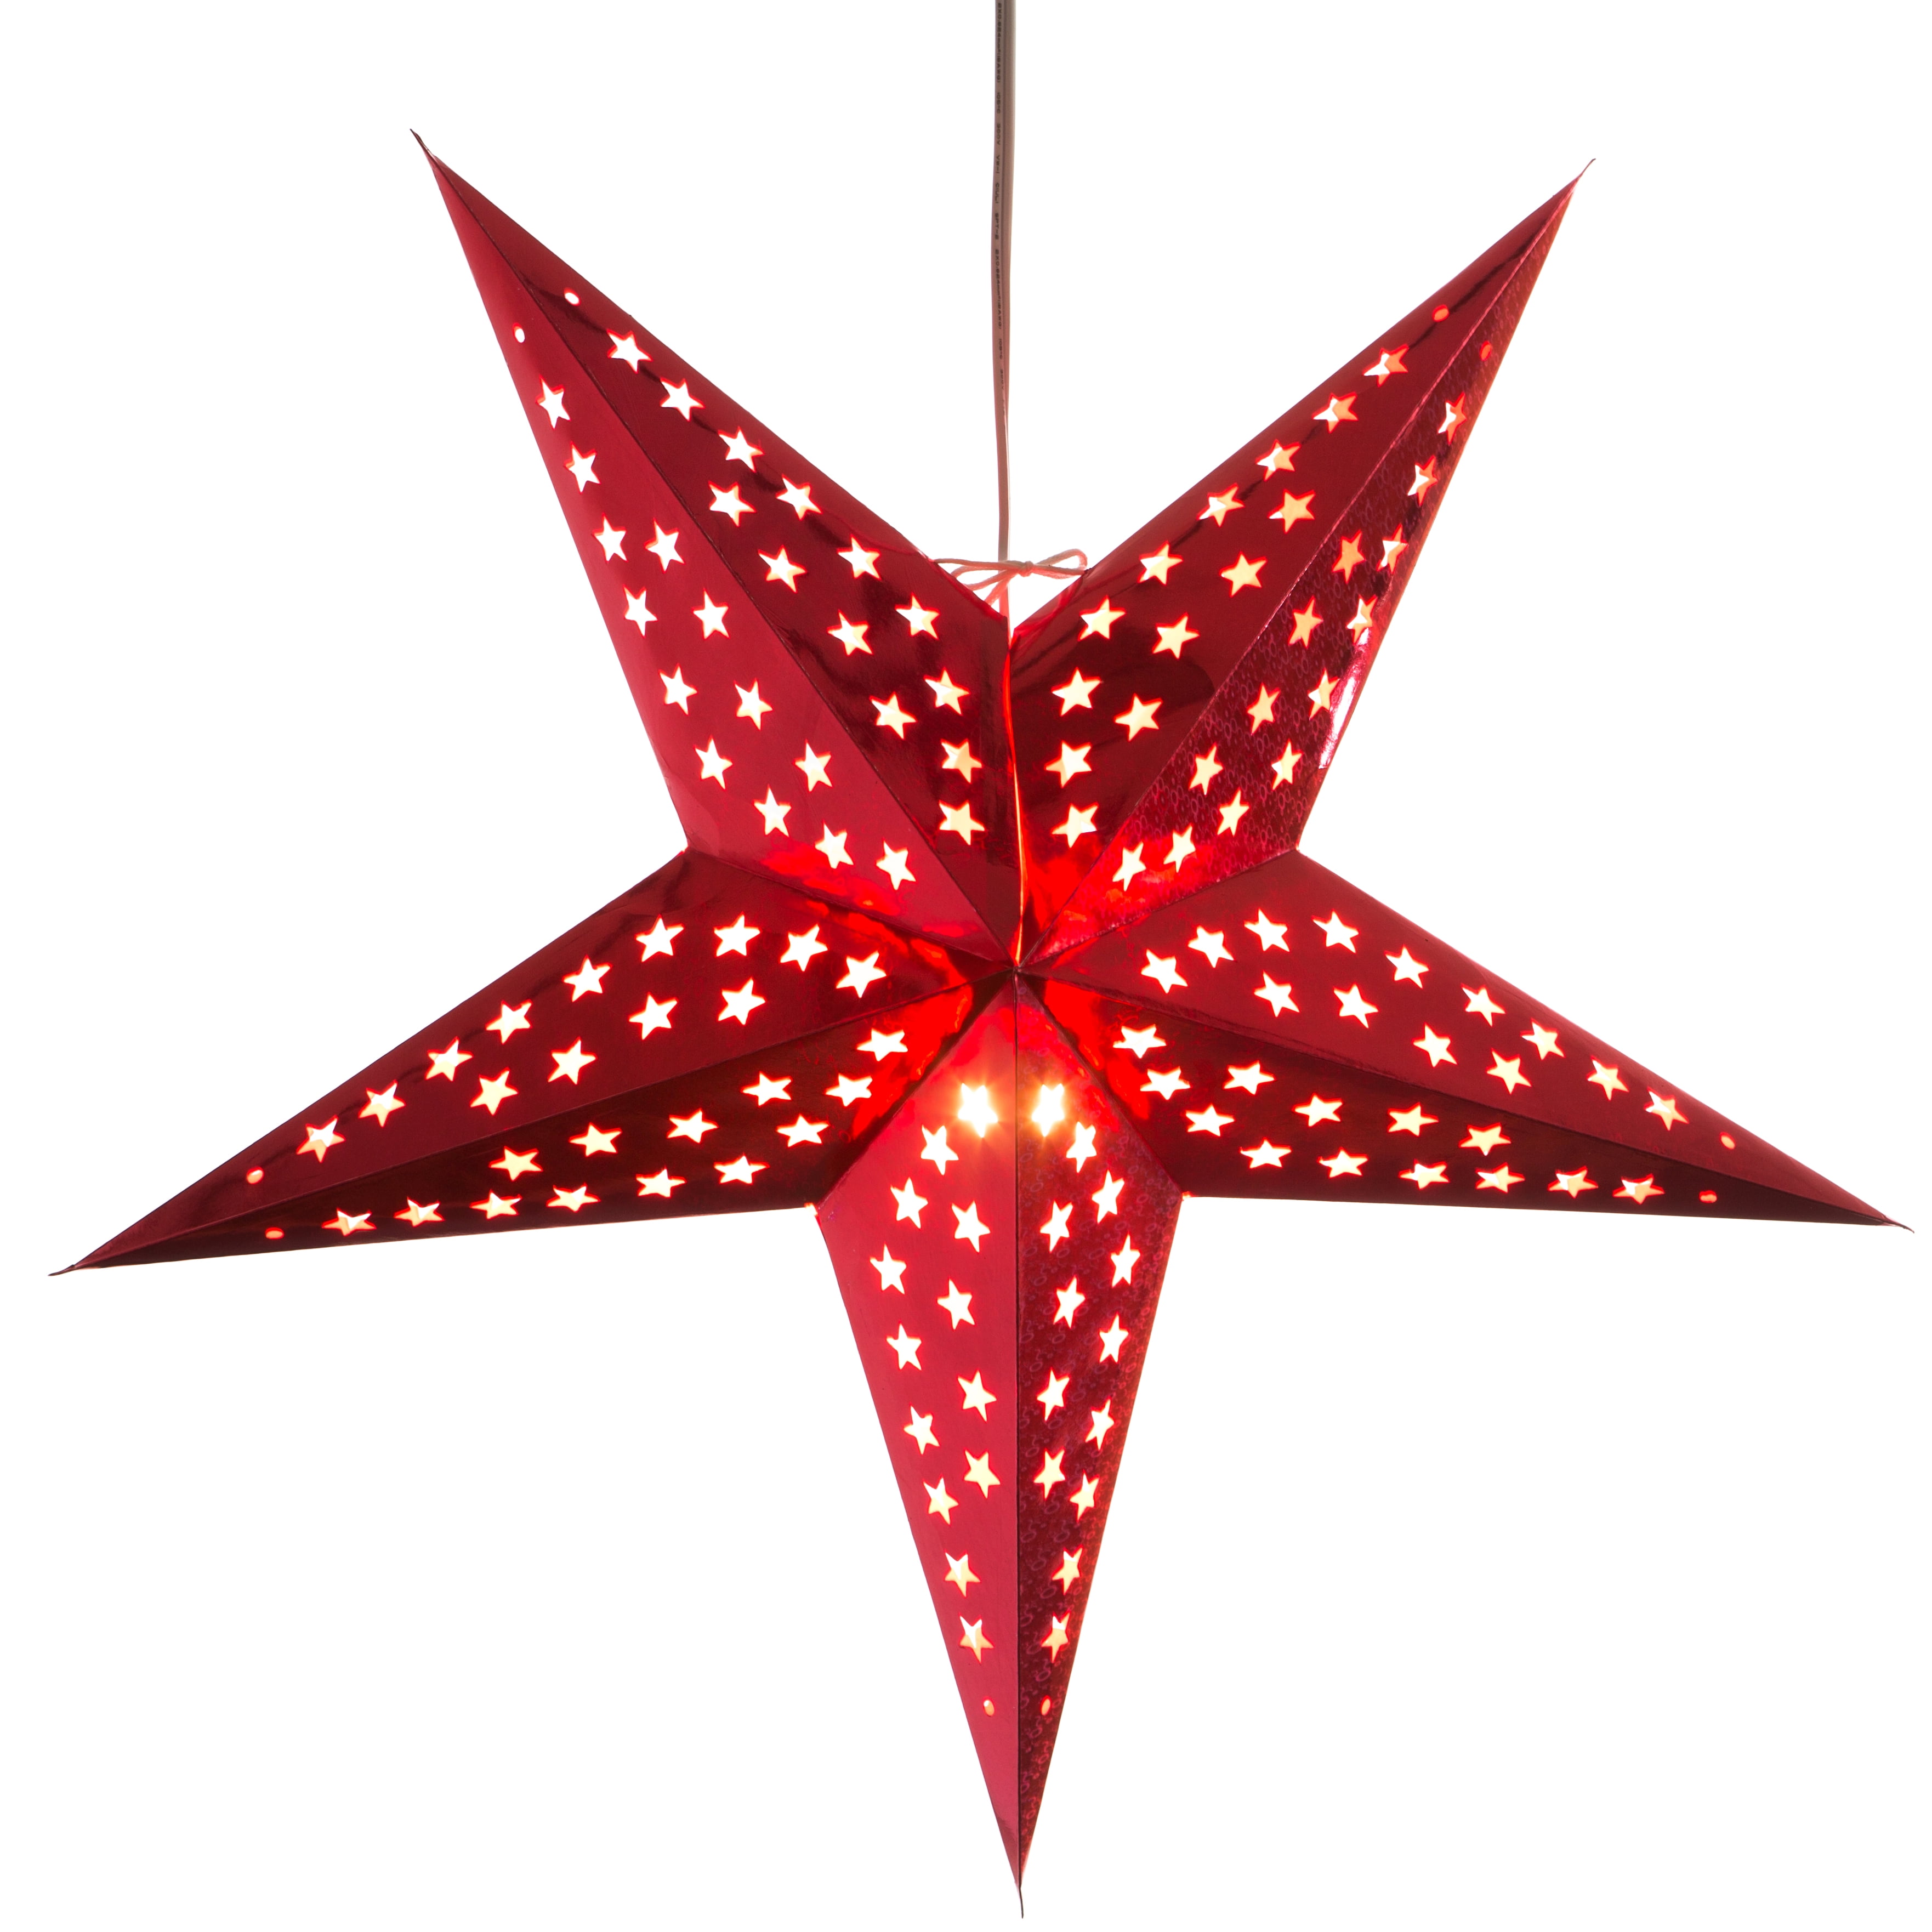 LIOOBO Paper Star Lantern Lamp Shade Hollow Out Hanging Lamp Shade Star Hanging Ornament for Wedding Birthday Party Home Decor